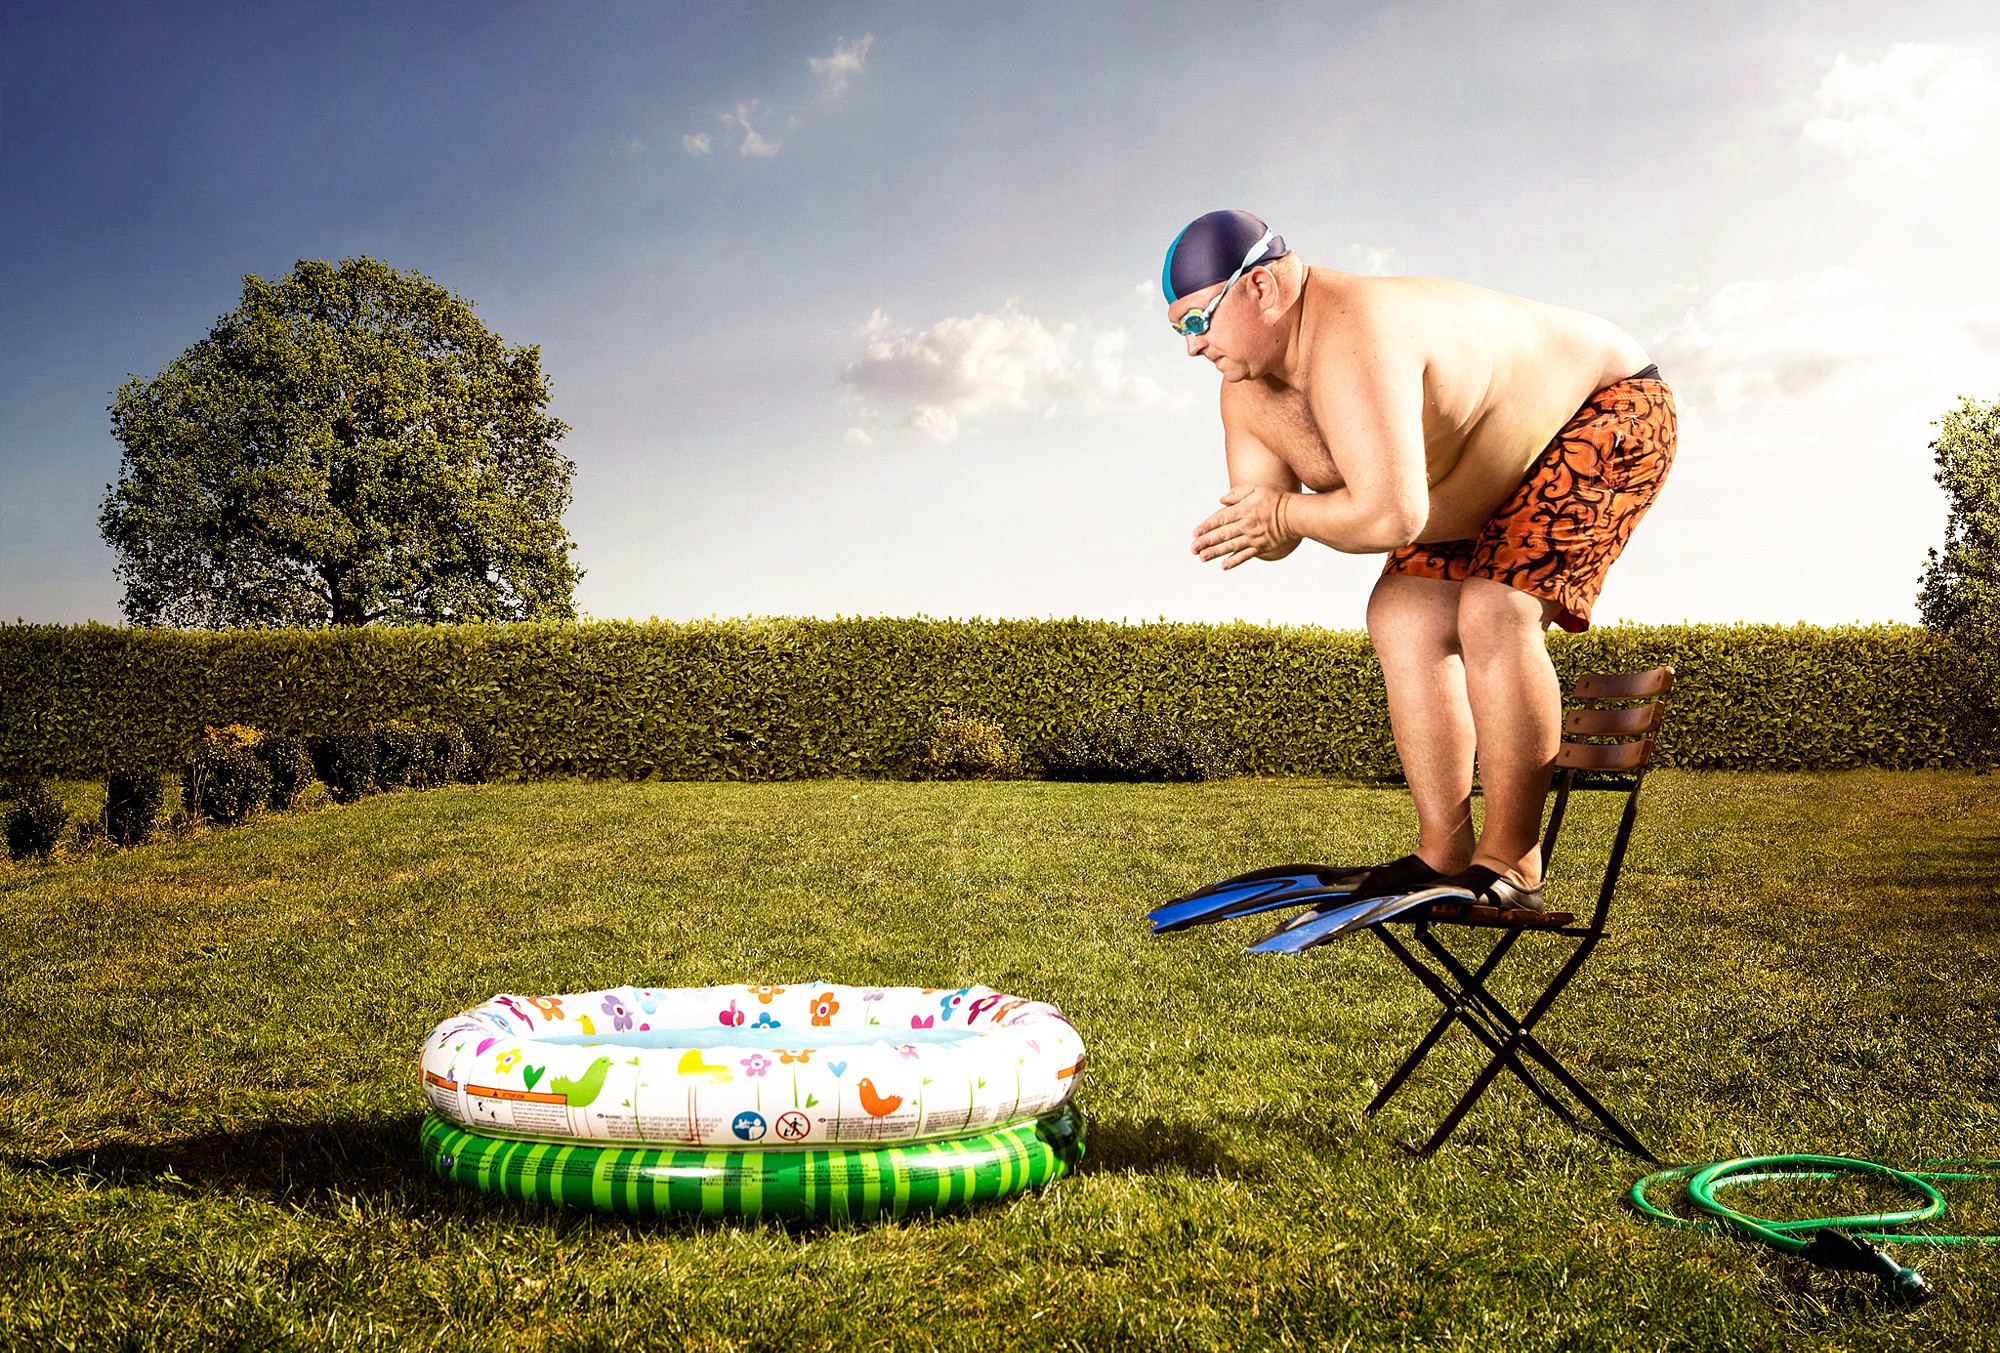 Download wallpaper for 800x600 resolution | Funny man jumping in pool |  funny | Wallpaper Better